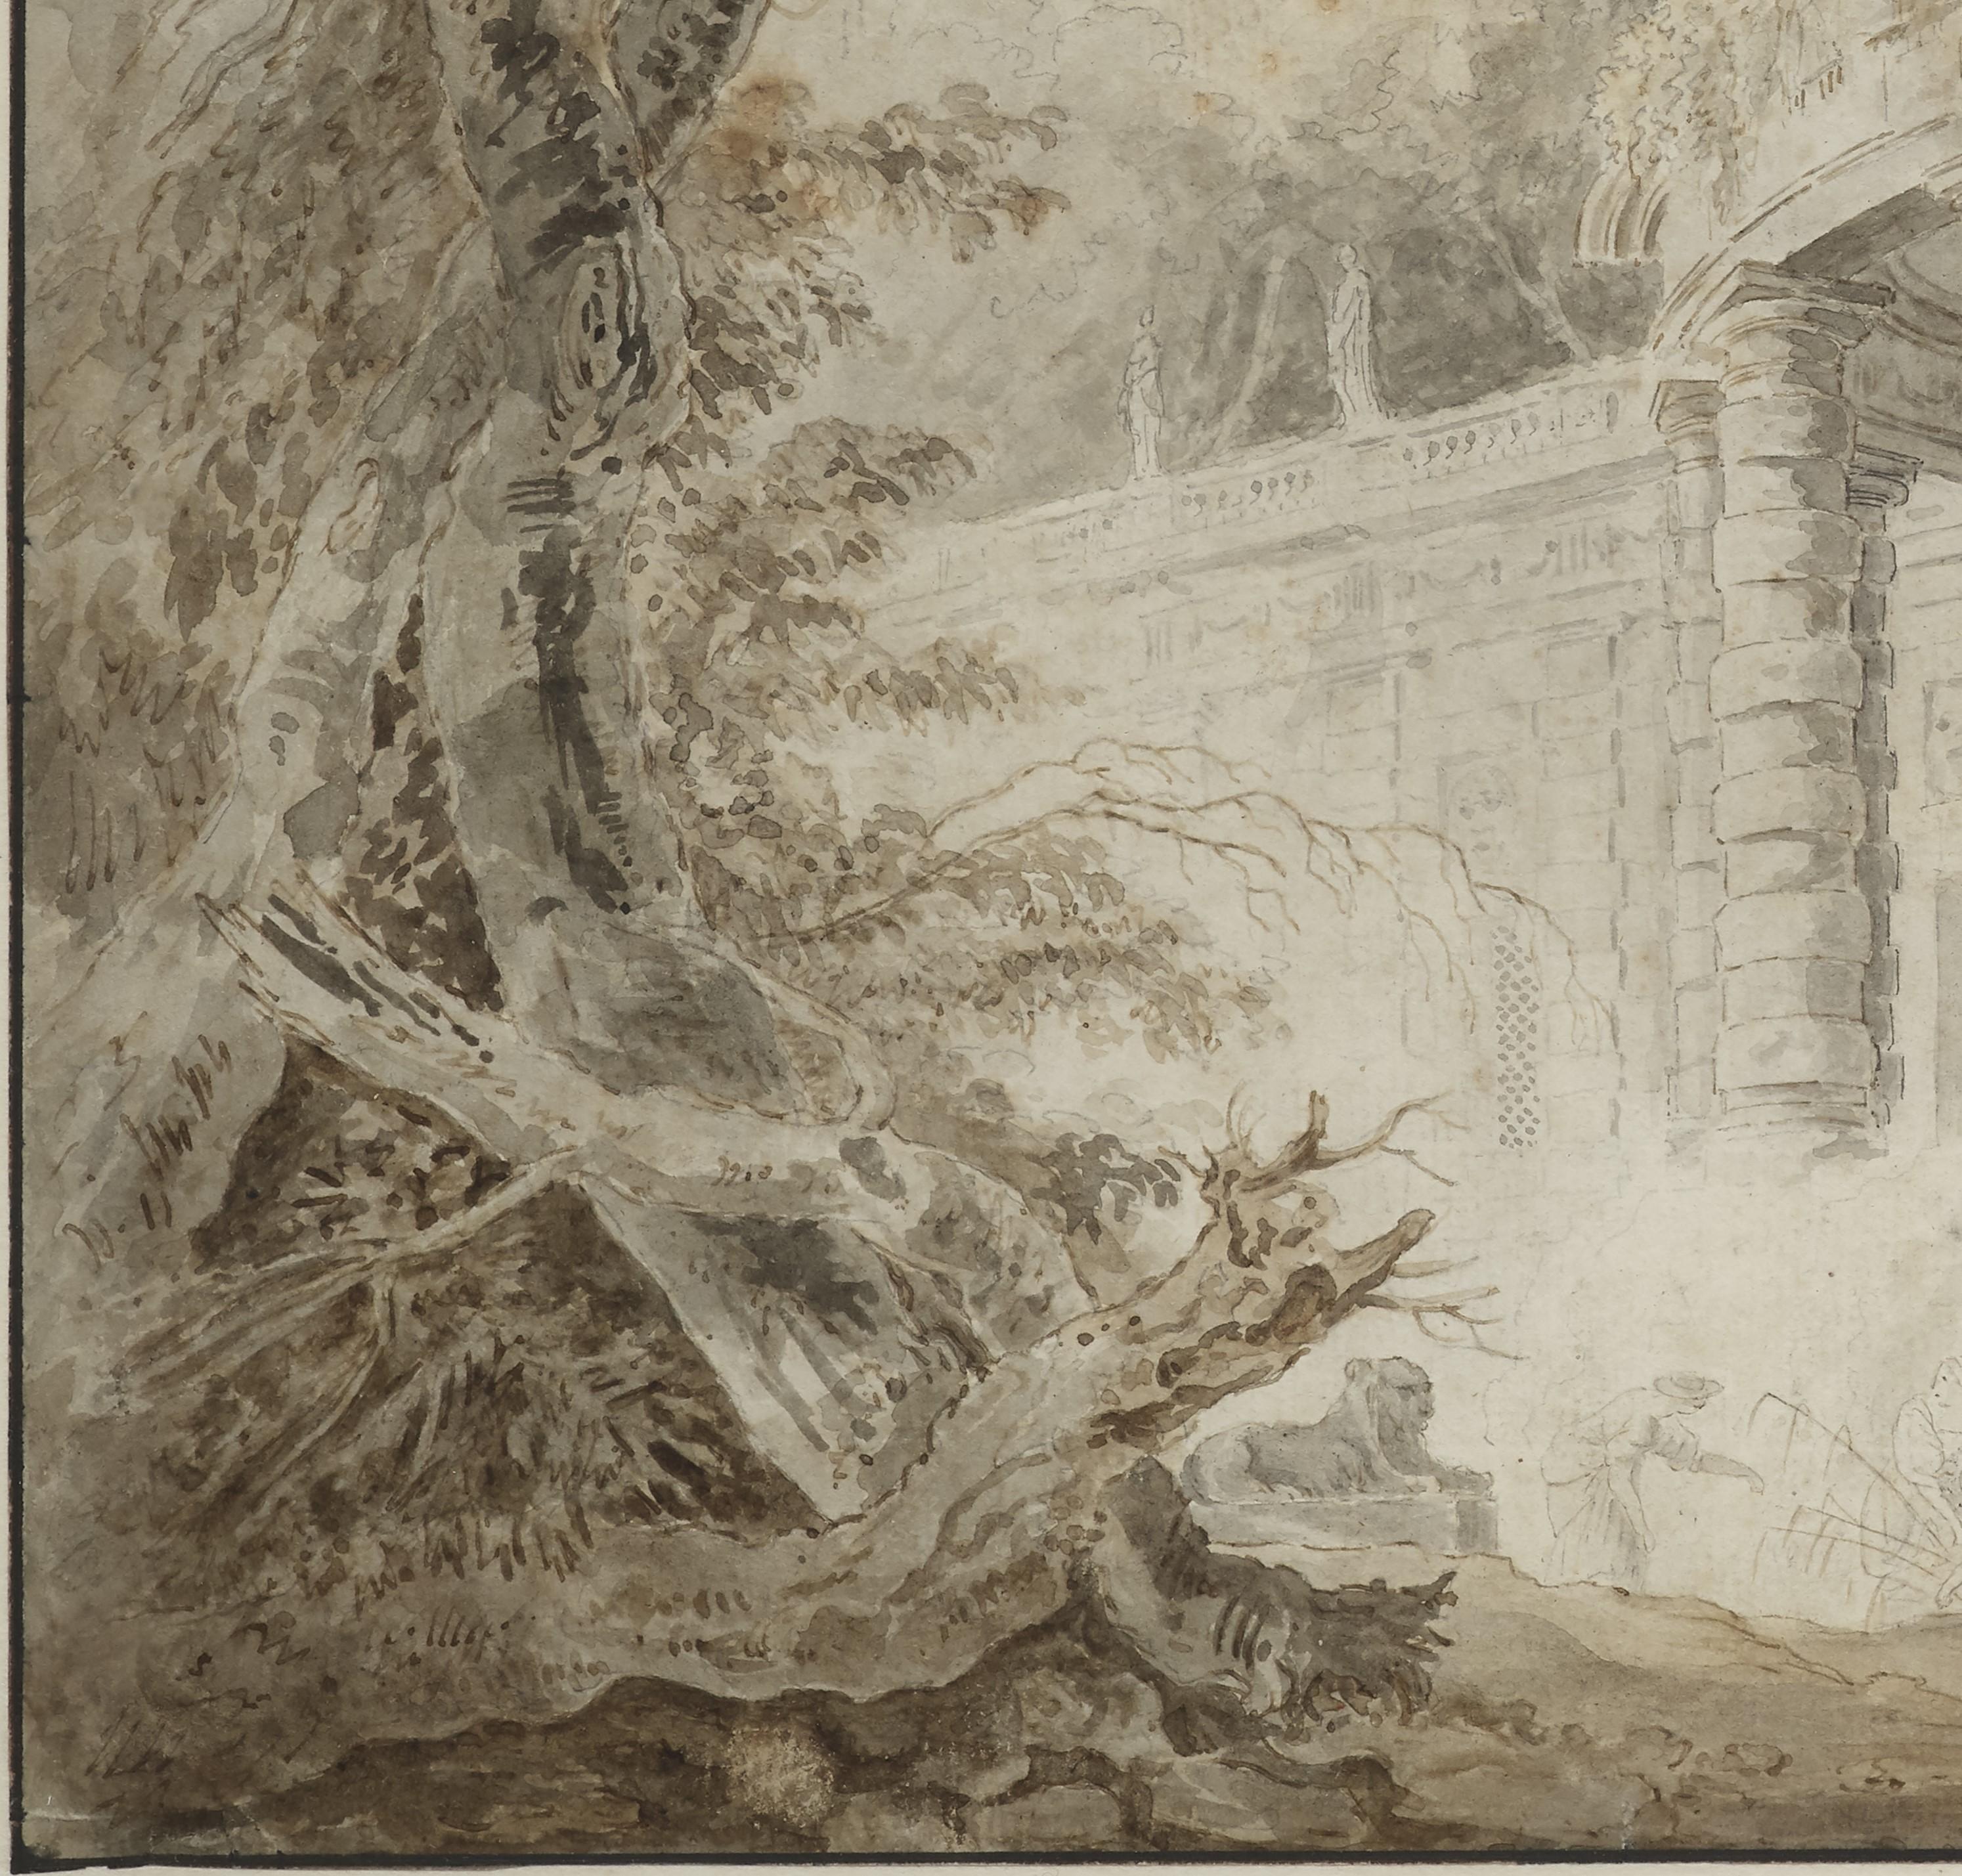 This large wash drawing is a slightly enlarged version of a composition executed by Hubert Robert in 1761, at the end of his stay in Rome. This composition is a marvellous synthesis of the painter's art: the clatter of the waterfall, in a grandiose